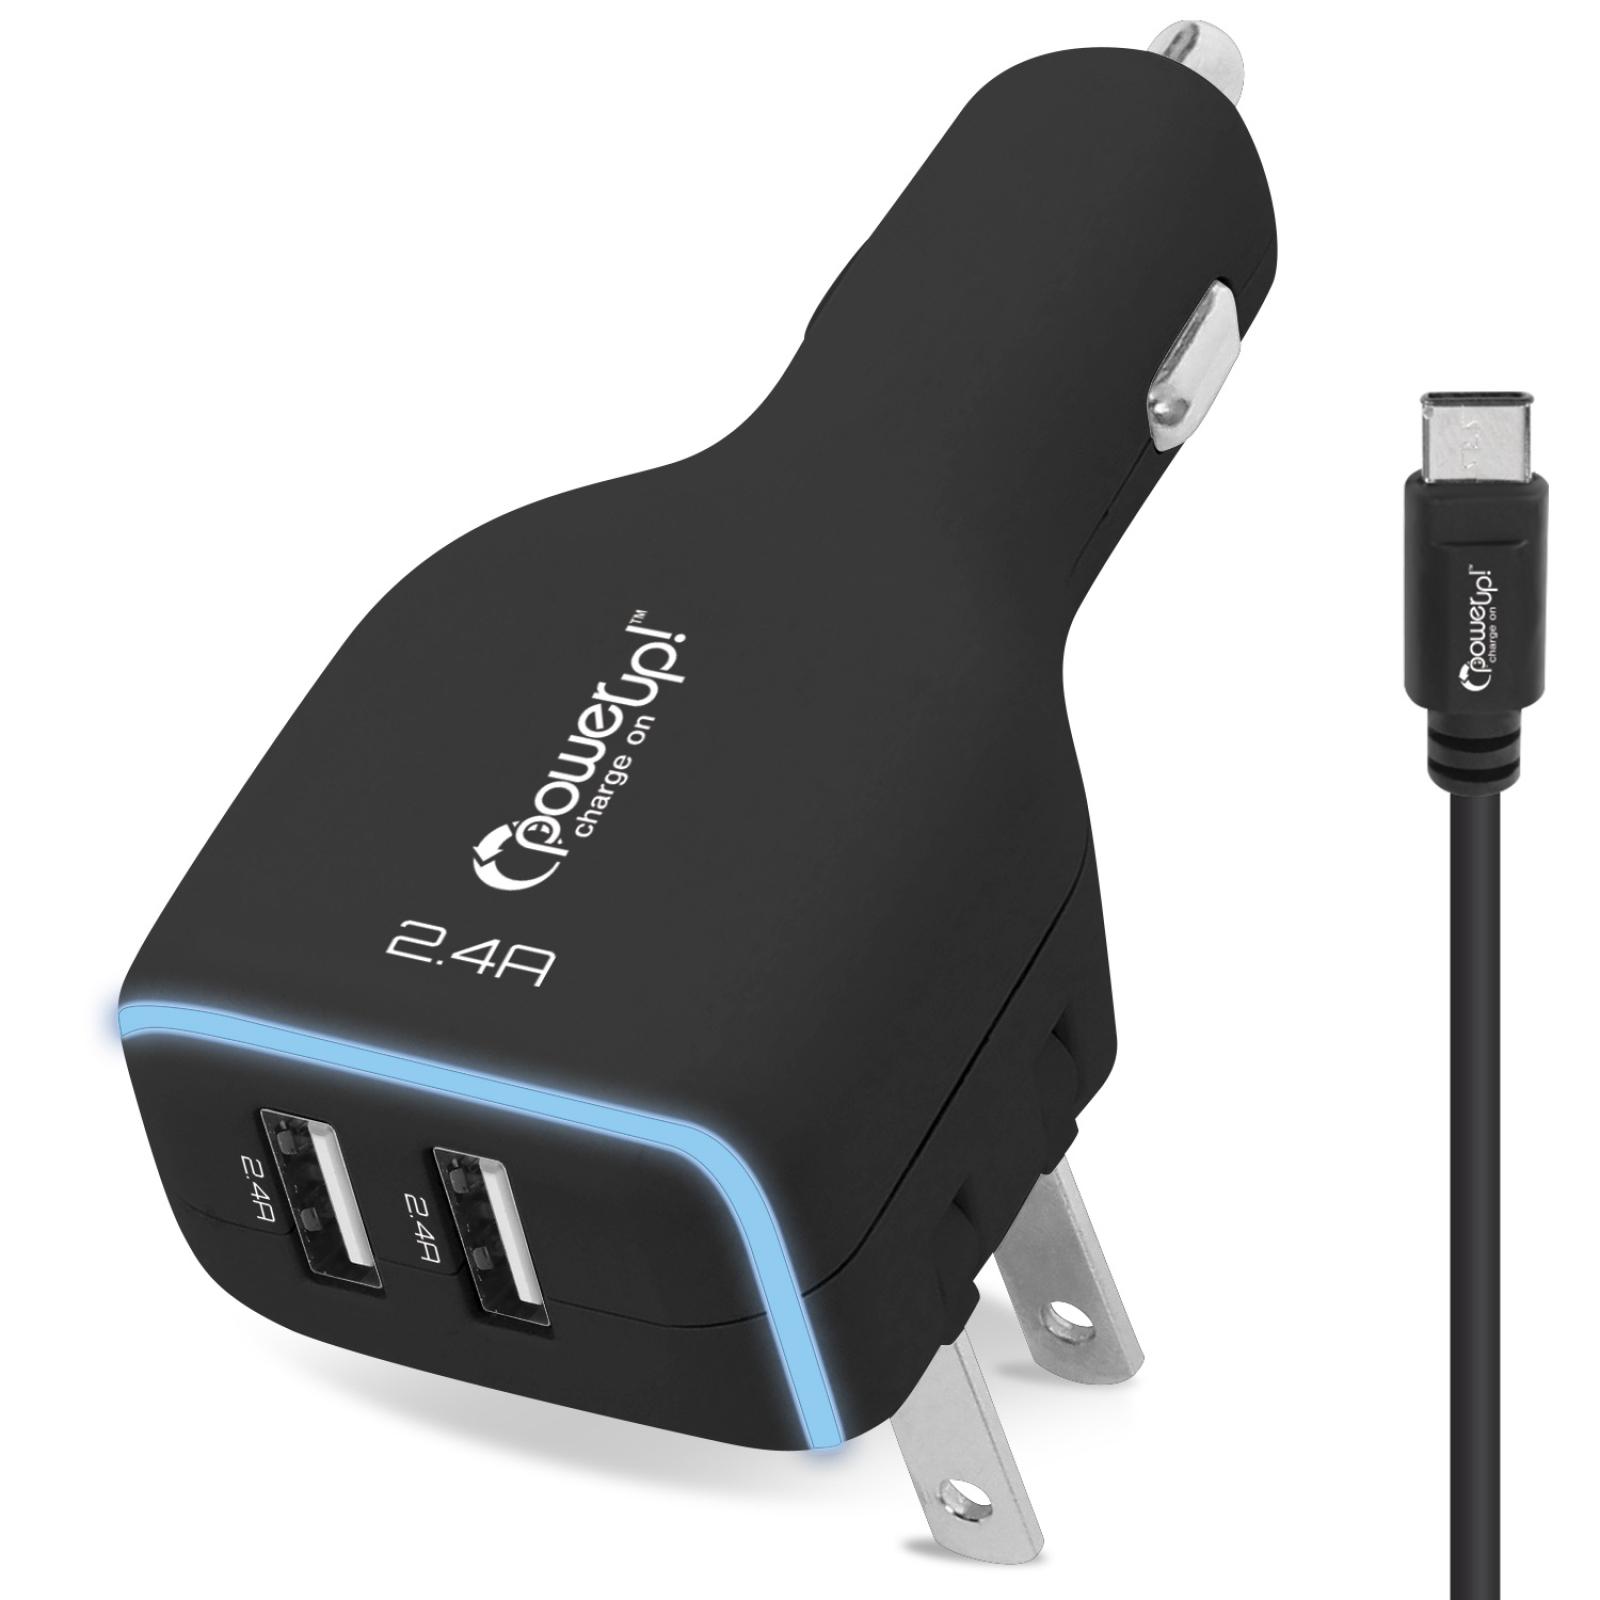 PowerUp! Charge On™ 3-in-1 Type C USB Charger